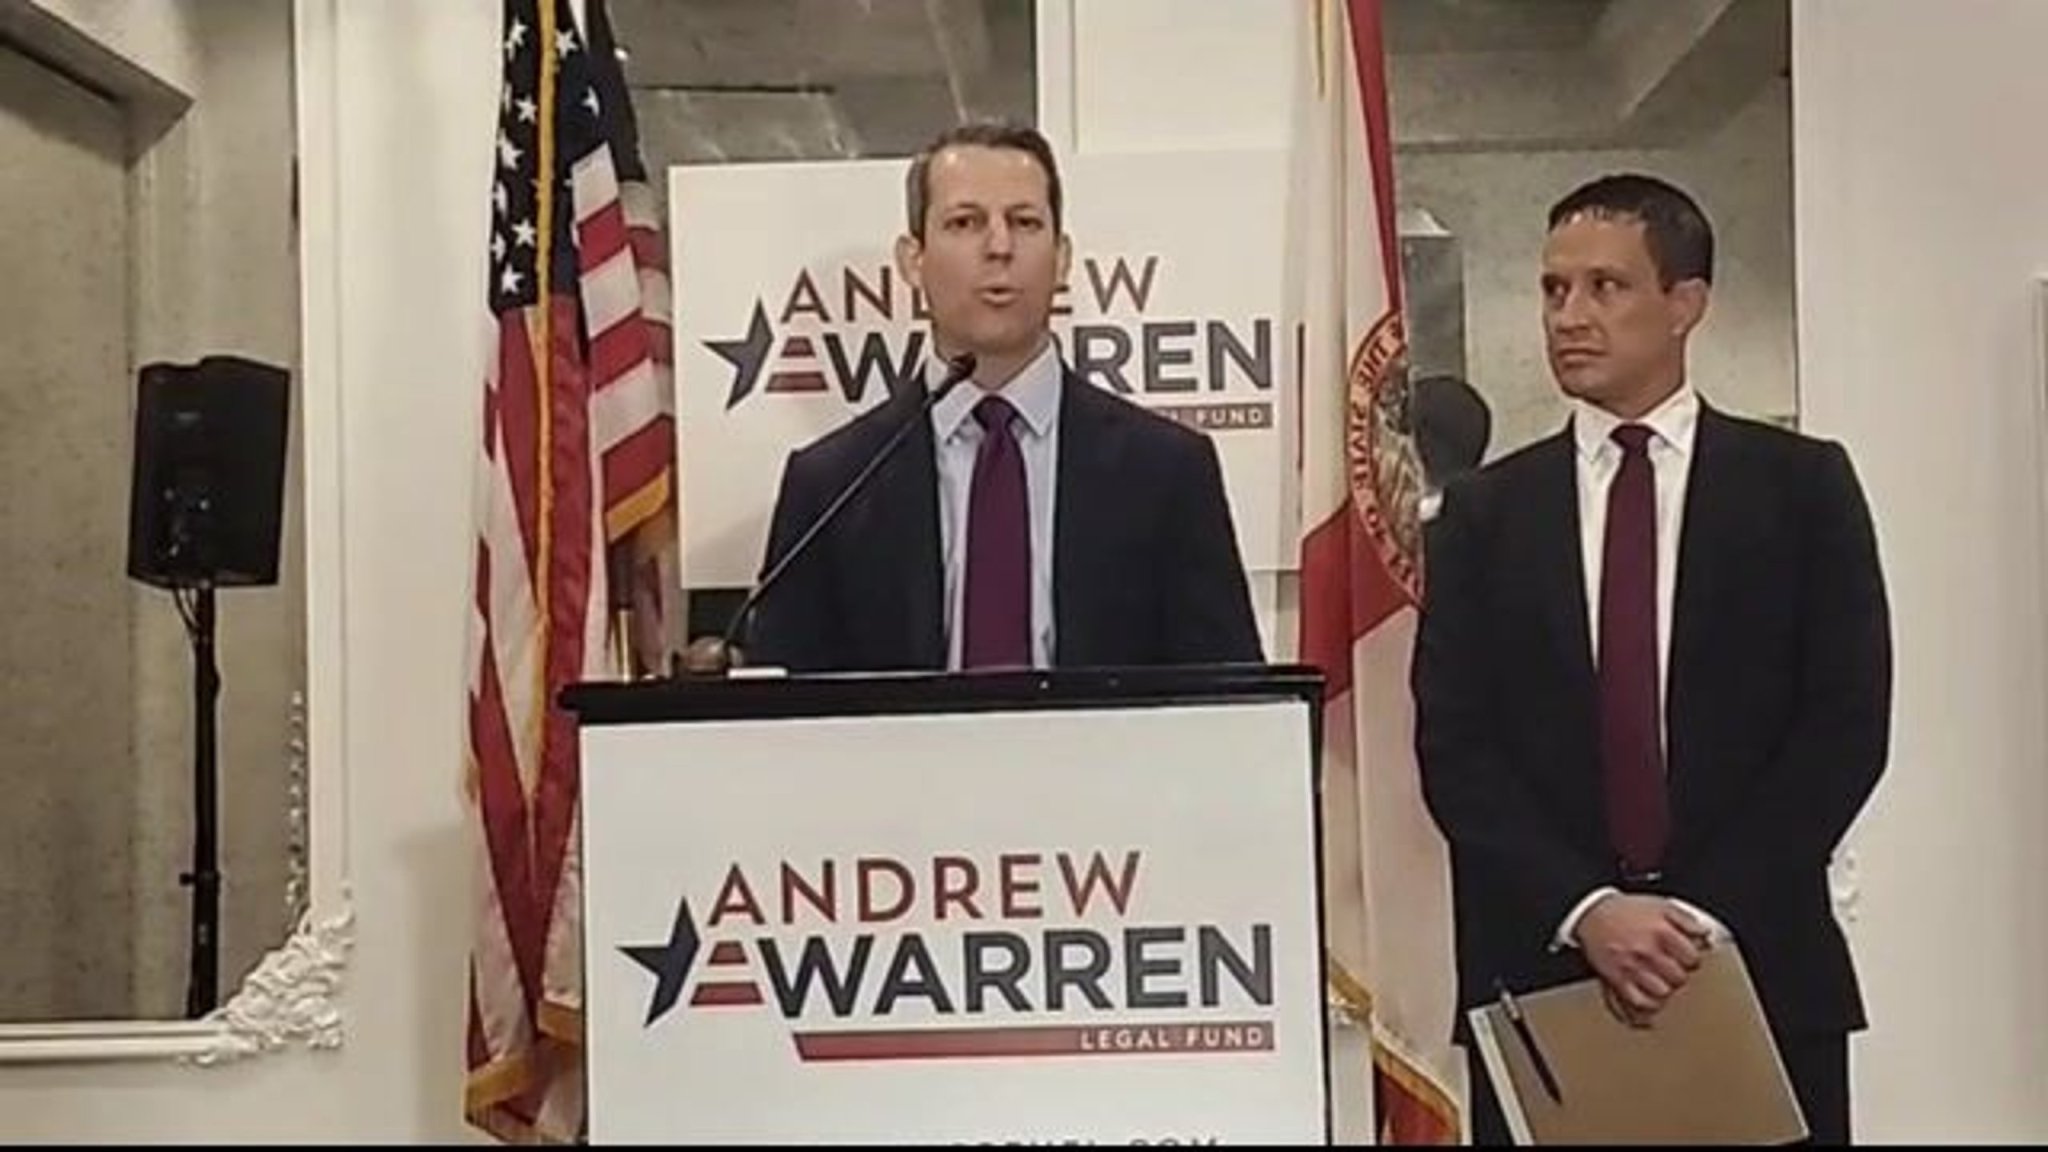 State Attorney Andrew Warren says he was forcibly removed from his office and replaced with a “Ron DeSantis accomplice.”